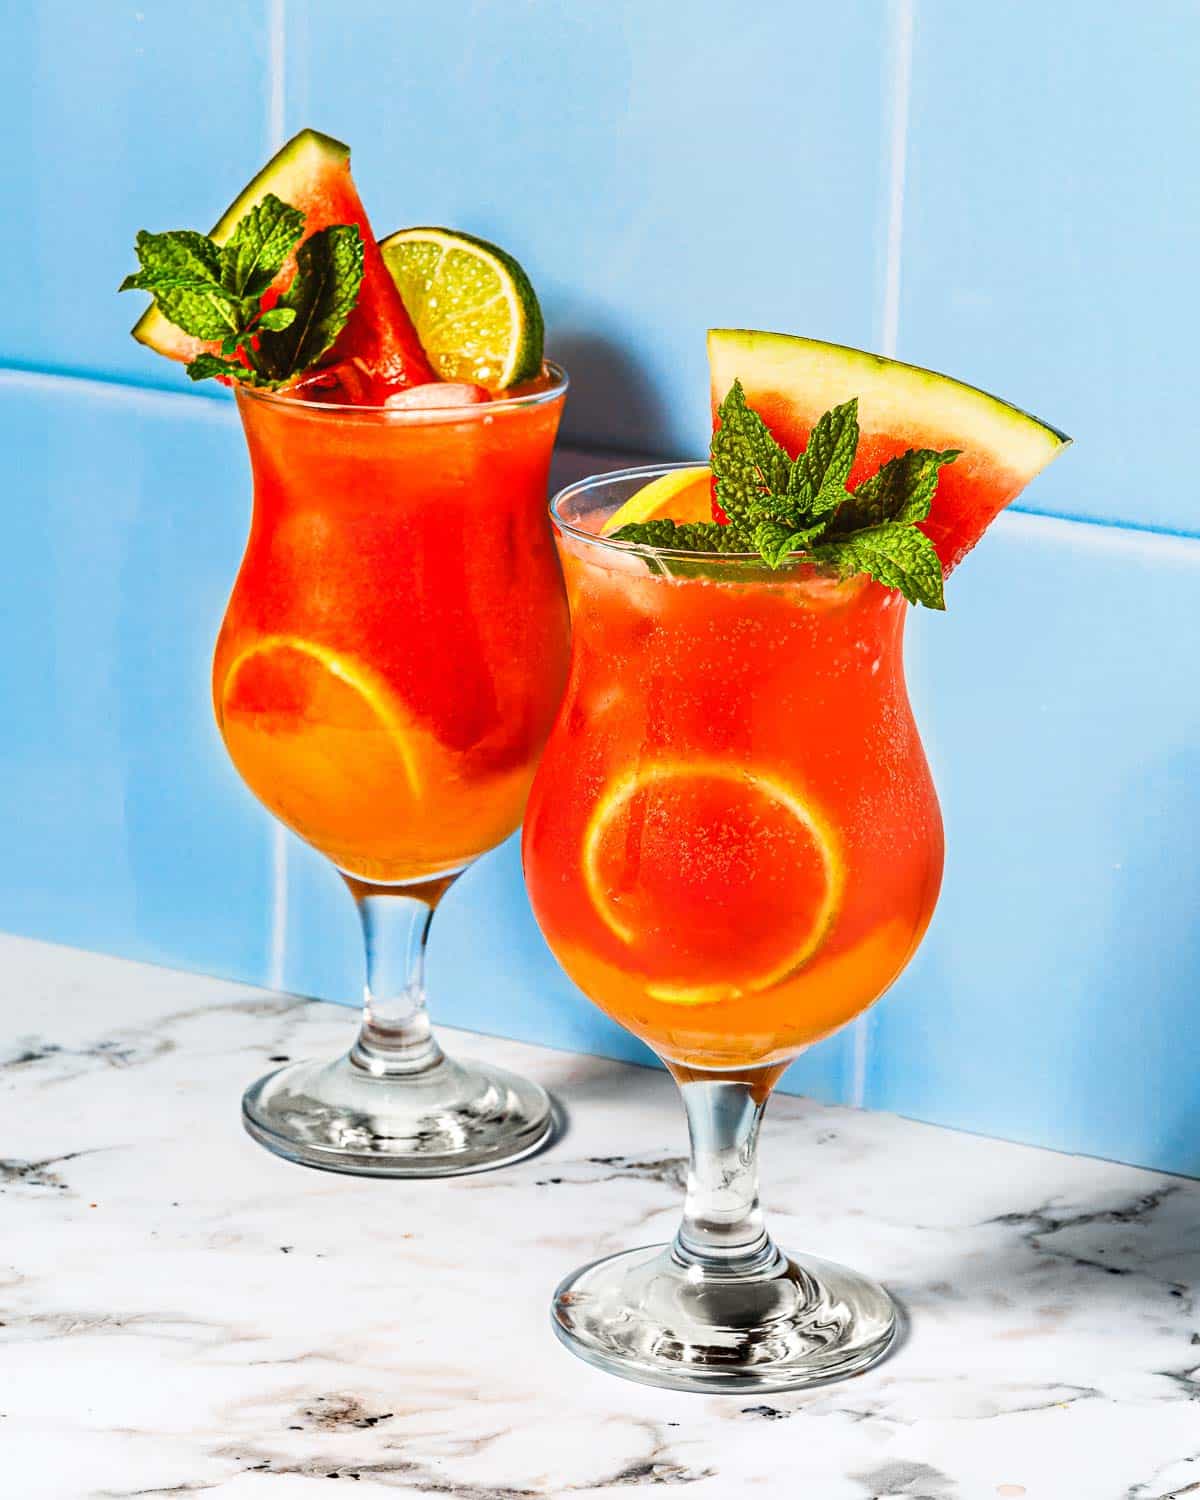 Image shows 2 glasses of Watermelon drinks non-alcoholic.